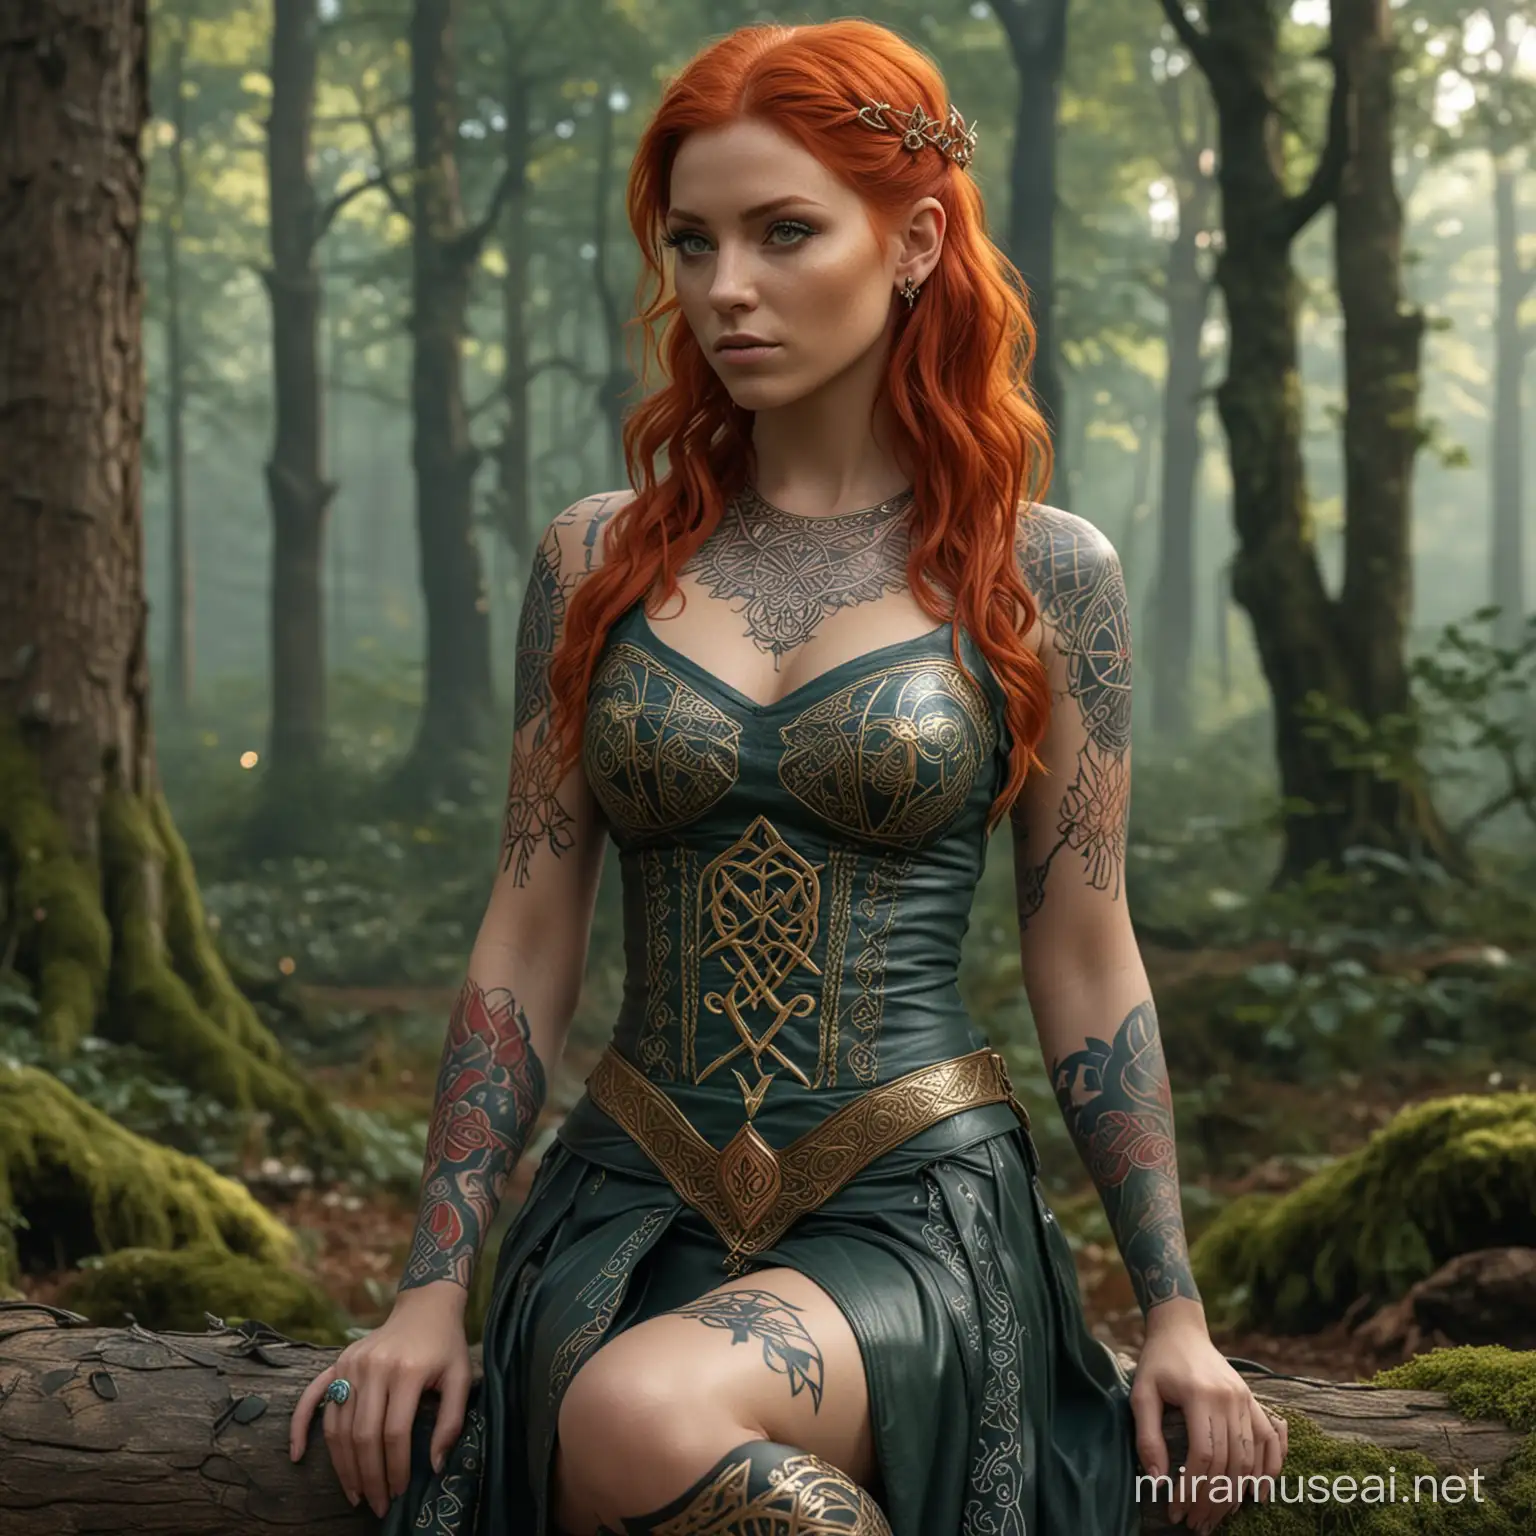 Fiery RedHaired Female with Celtic and Elven Symbols in Enchanted Forest